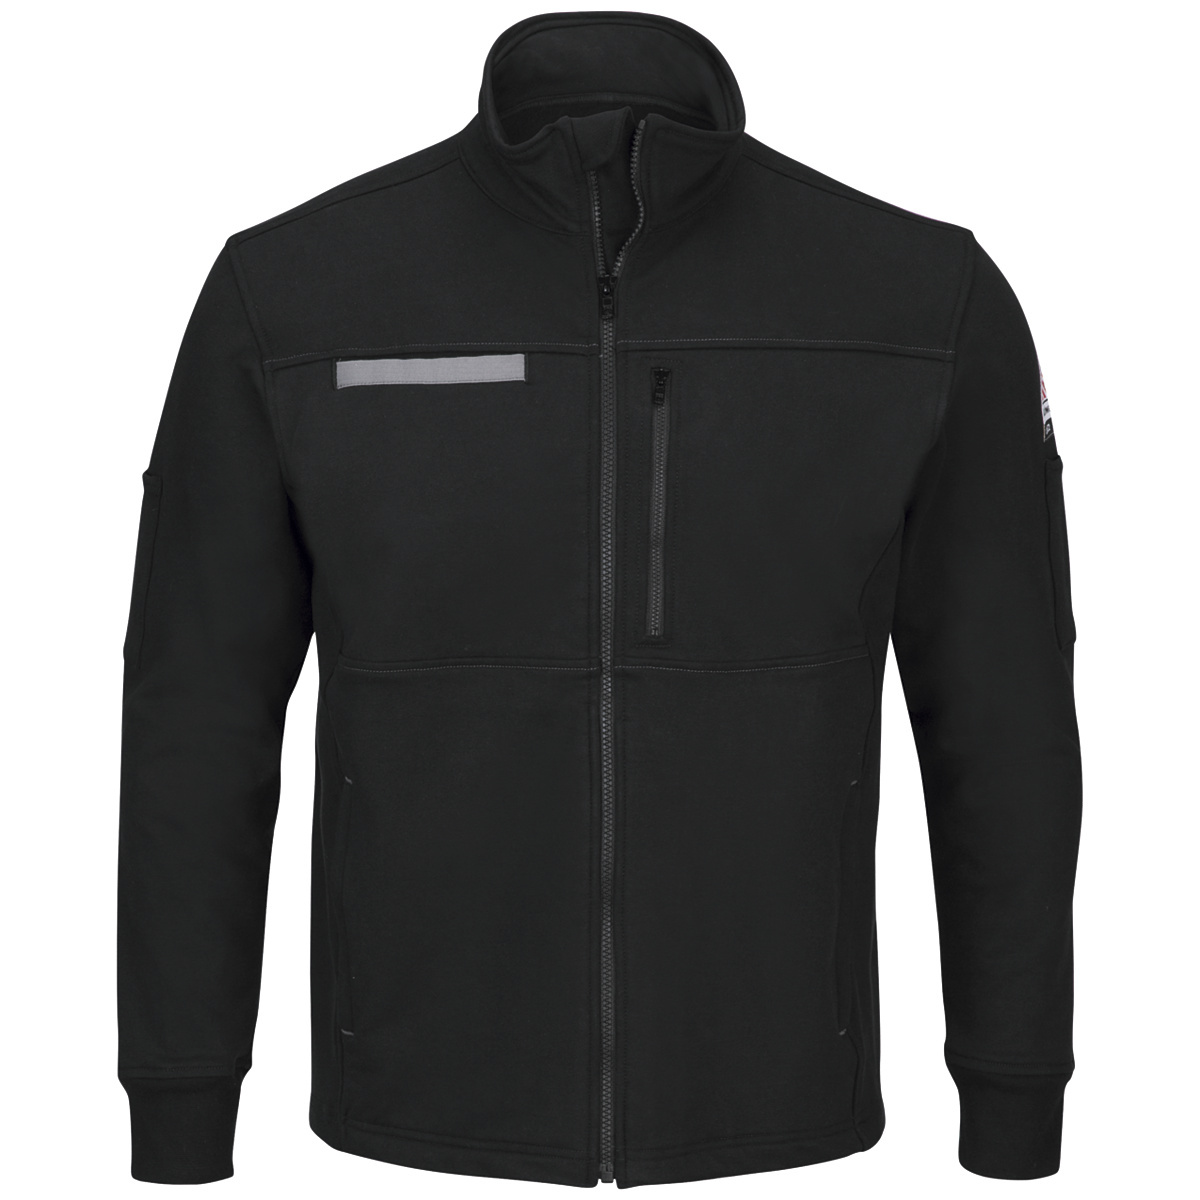 Bulwark® Large Tall Black Cotton/Spandex Flame Resistant Jacket With Zipper Front Closure